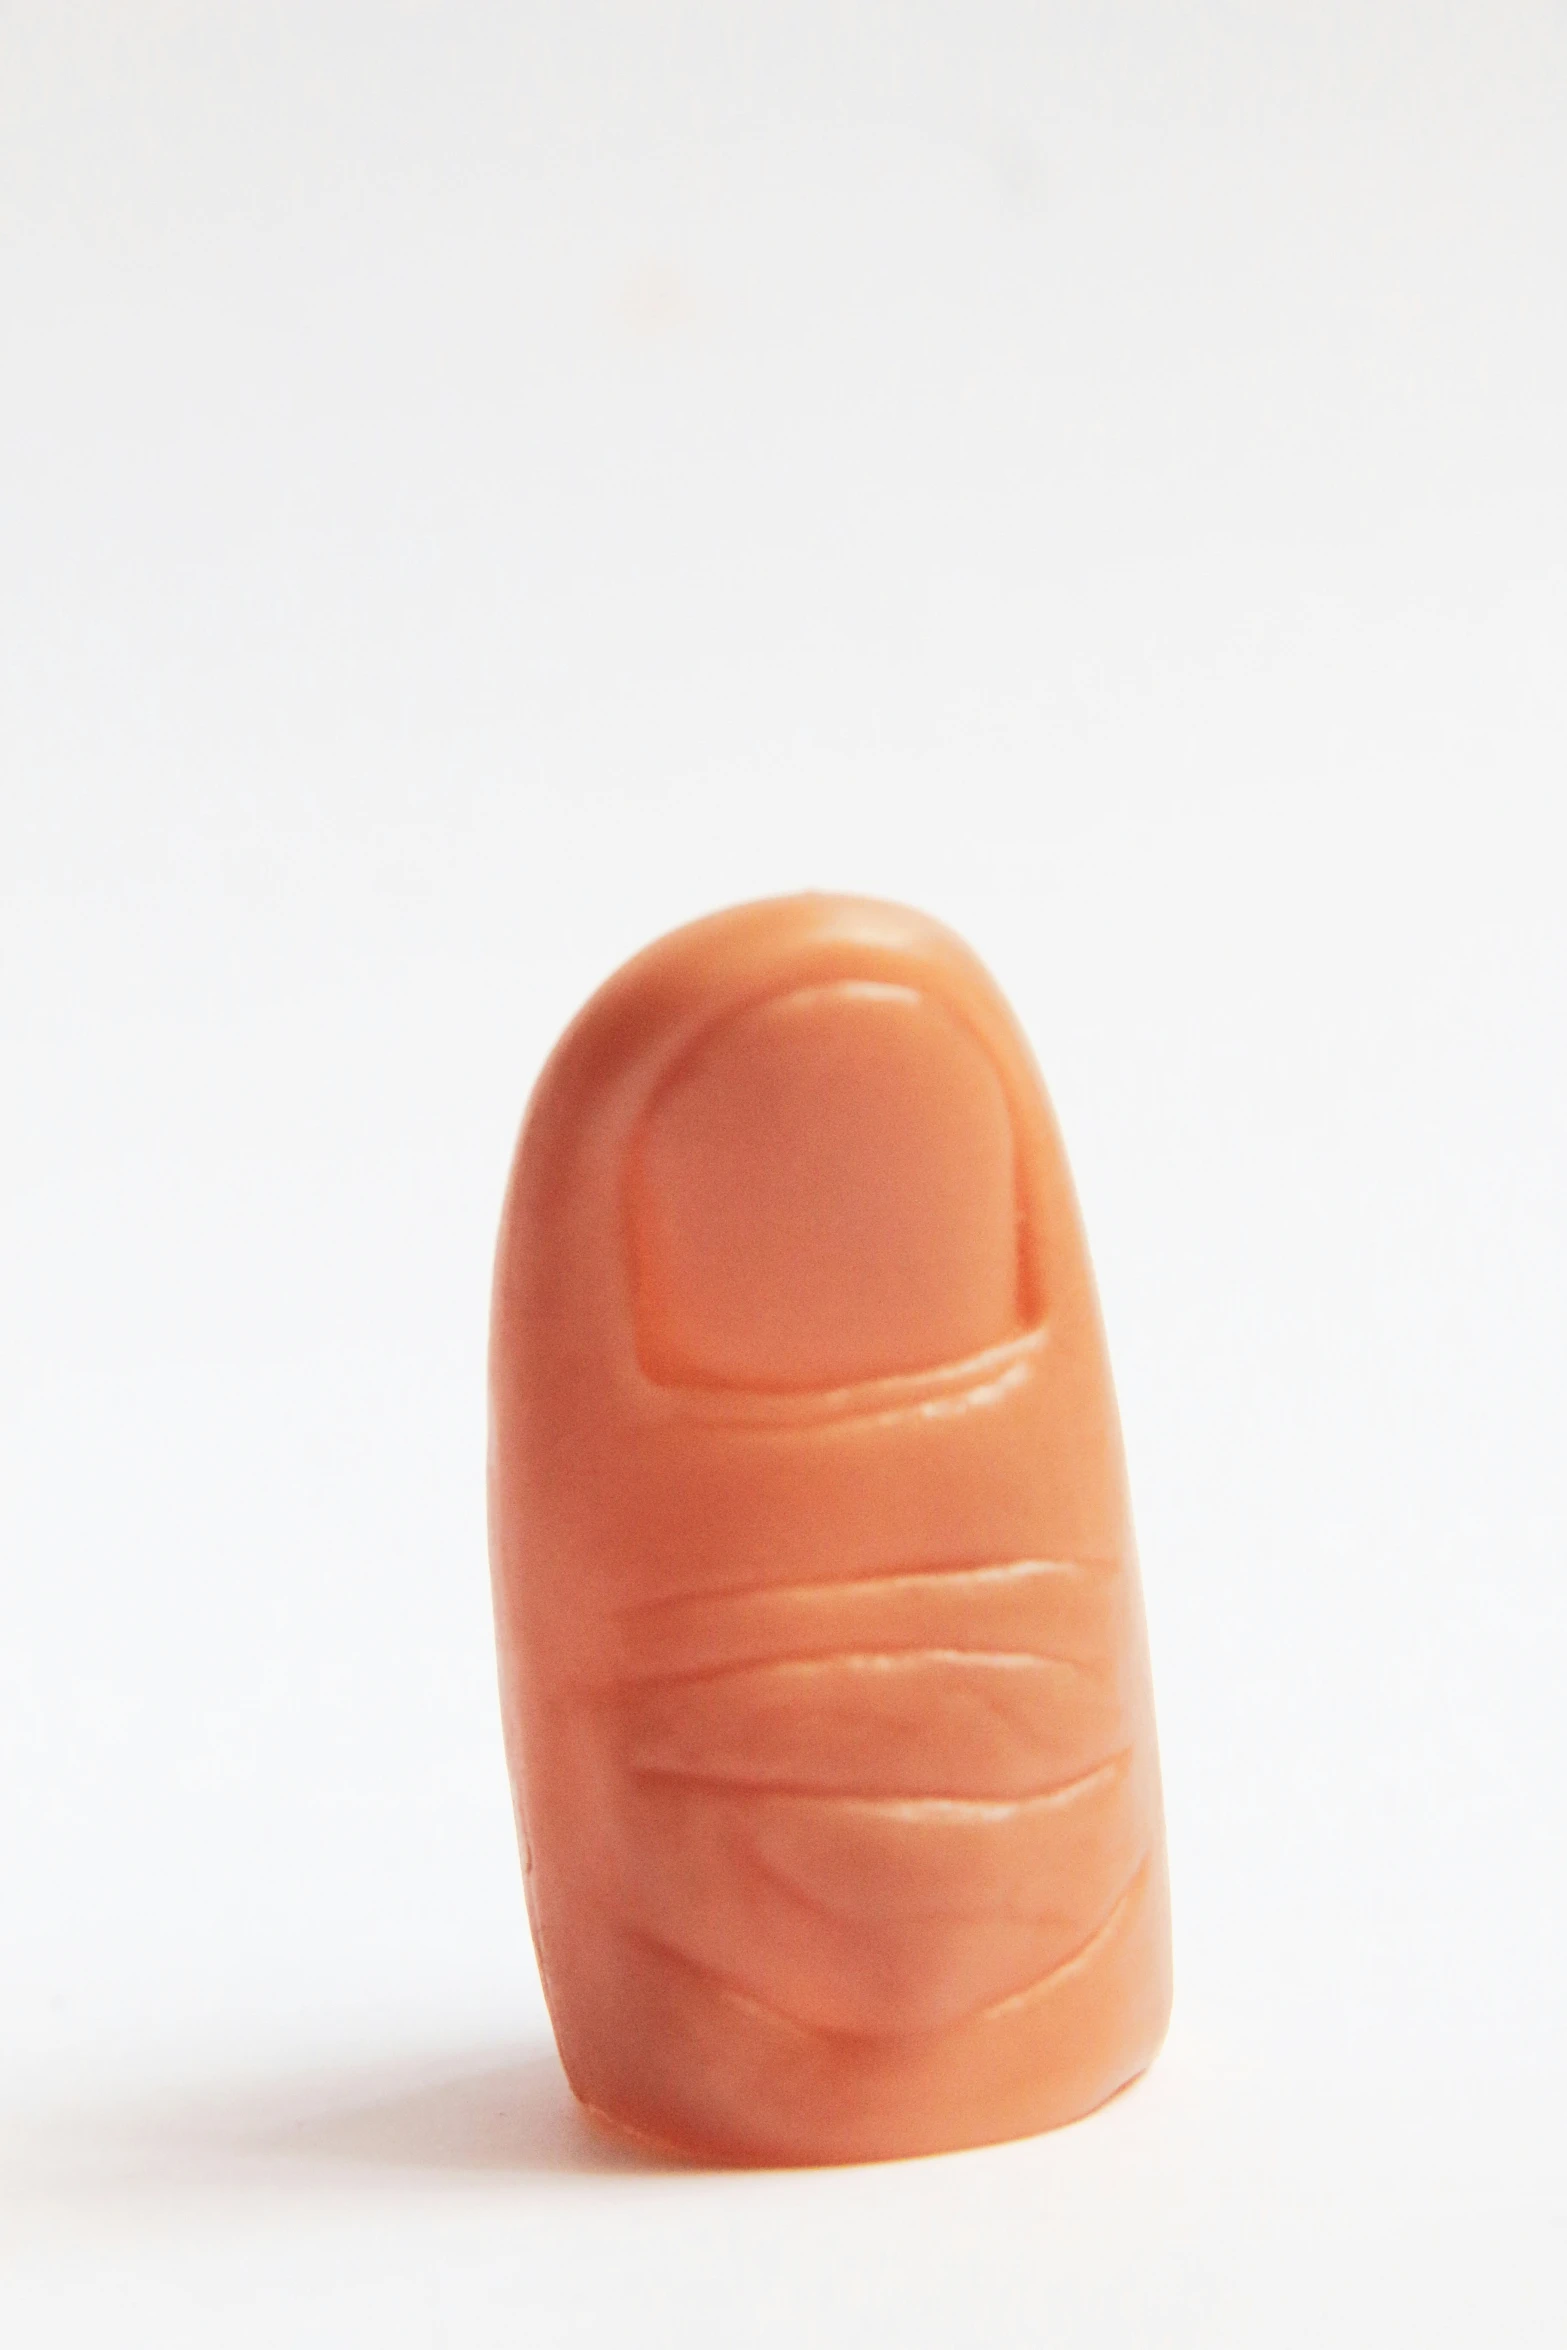 a finger nail or gel with a wave pattern on it